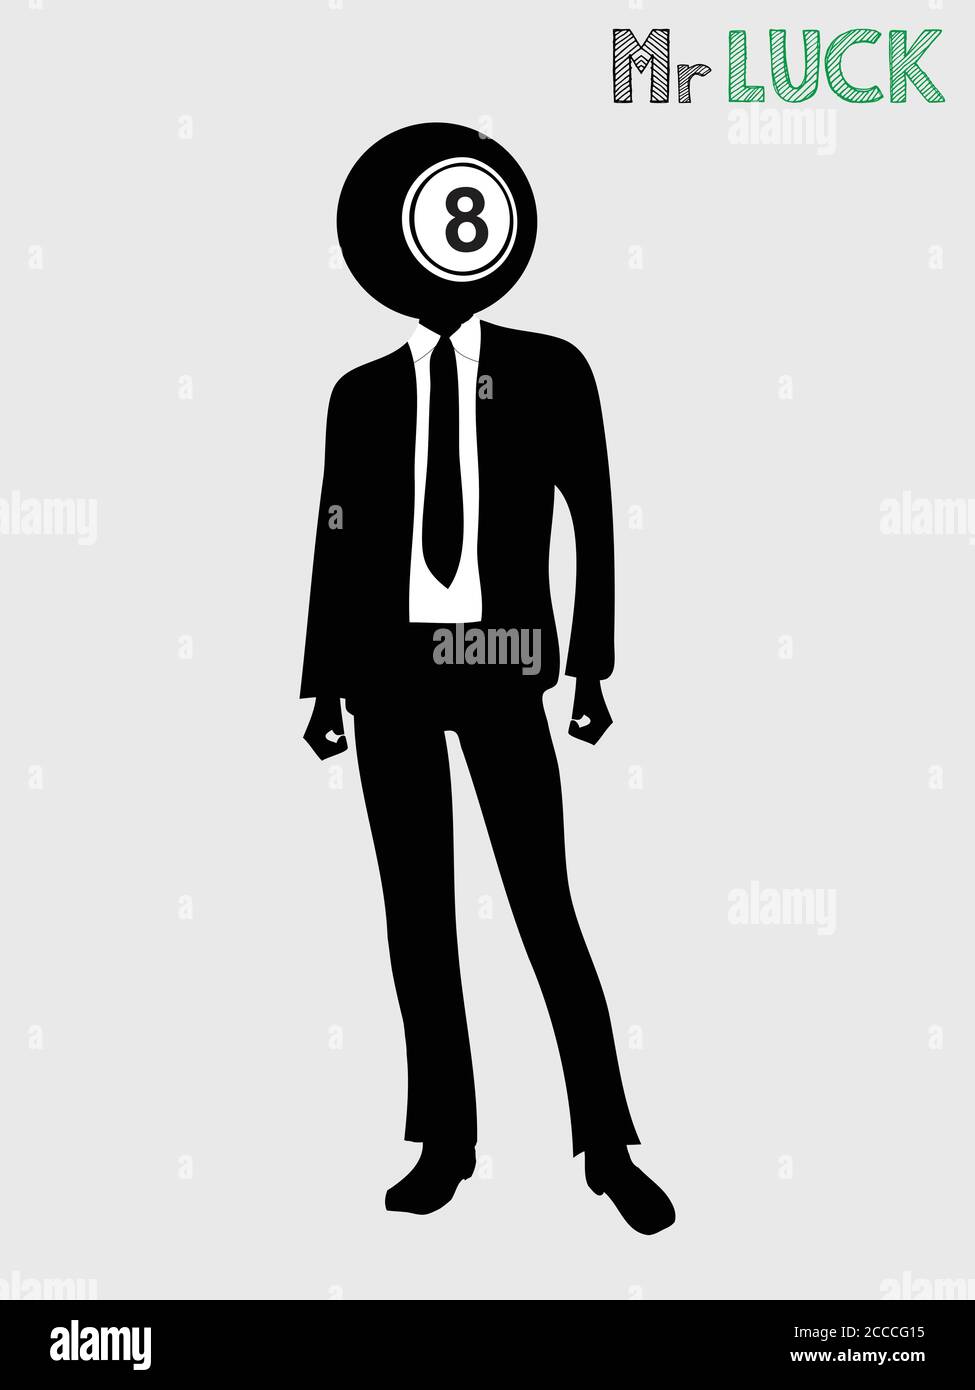 Black and White Silhouette of Suited Man With Bingo Lotto Ball Number Eight As Head And Decorative Text Mr Luck Over White Background Stock Vector